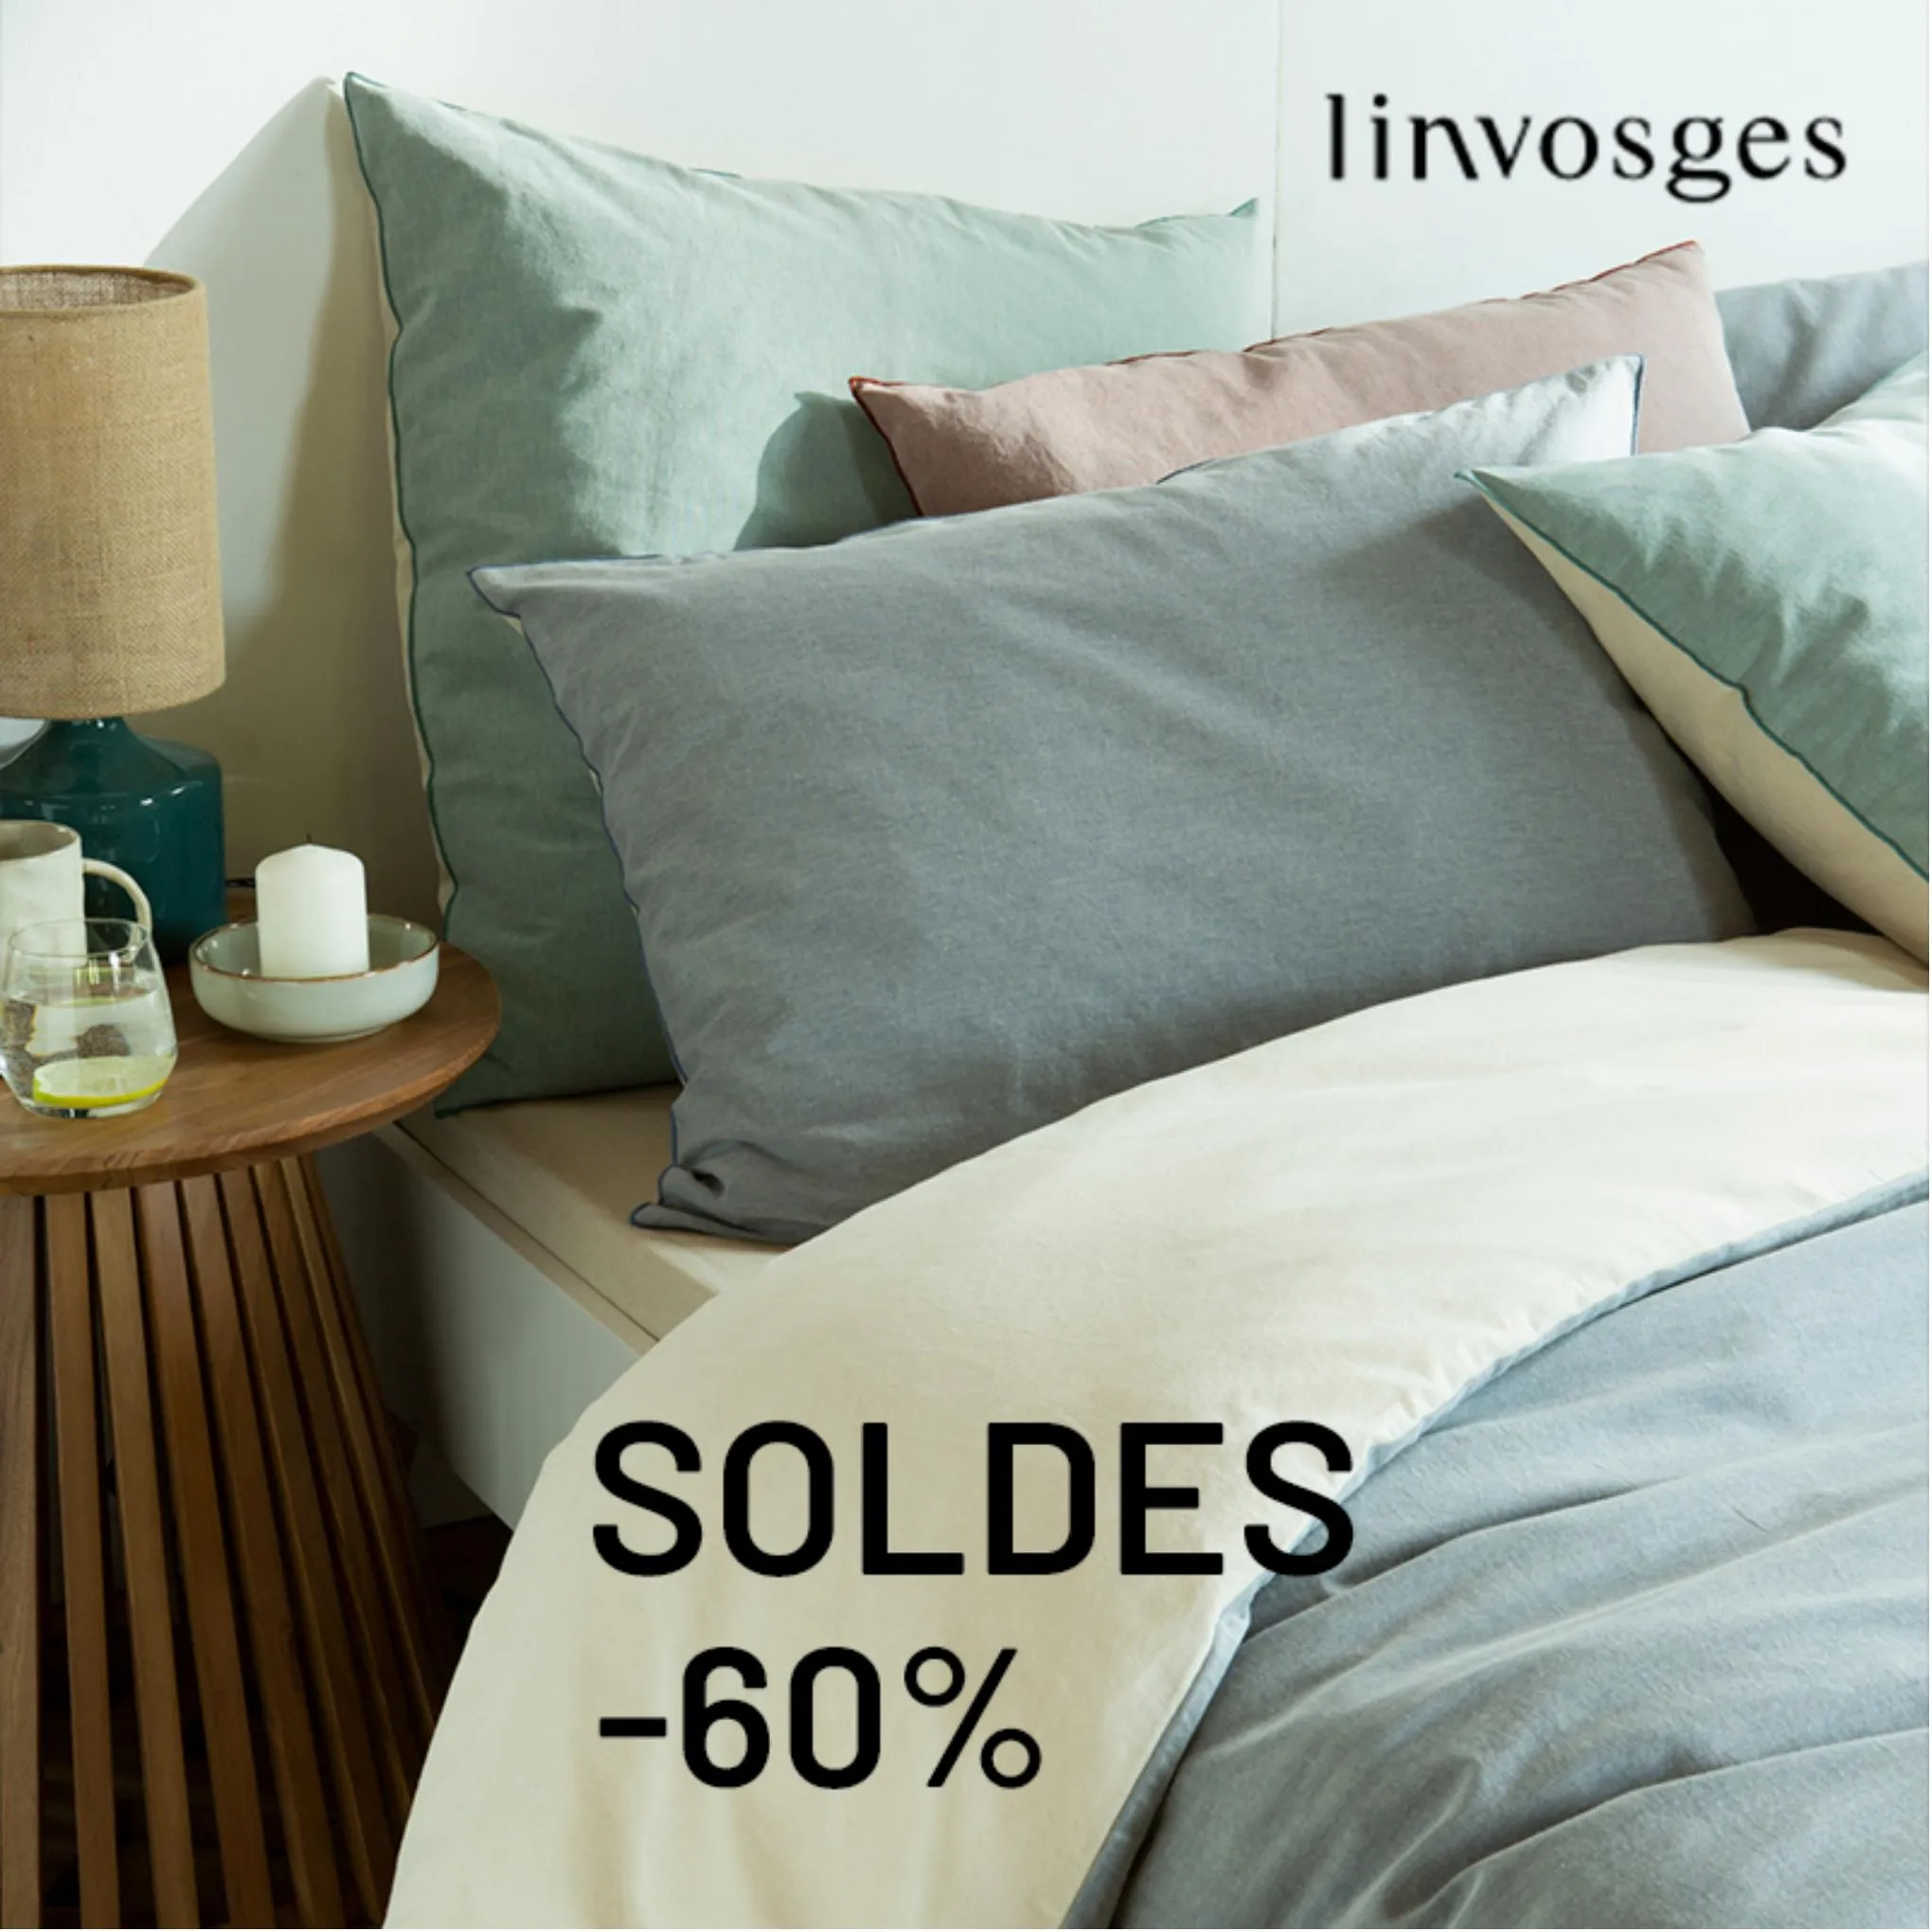 Catalogue SOLDES -60%, page 00001